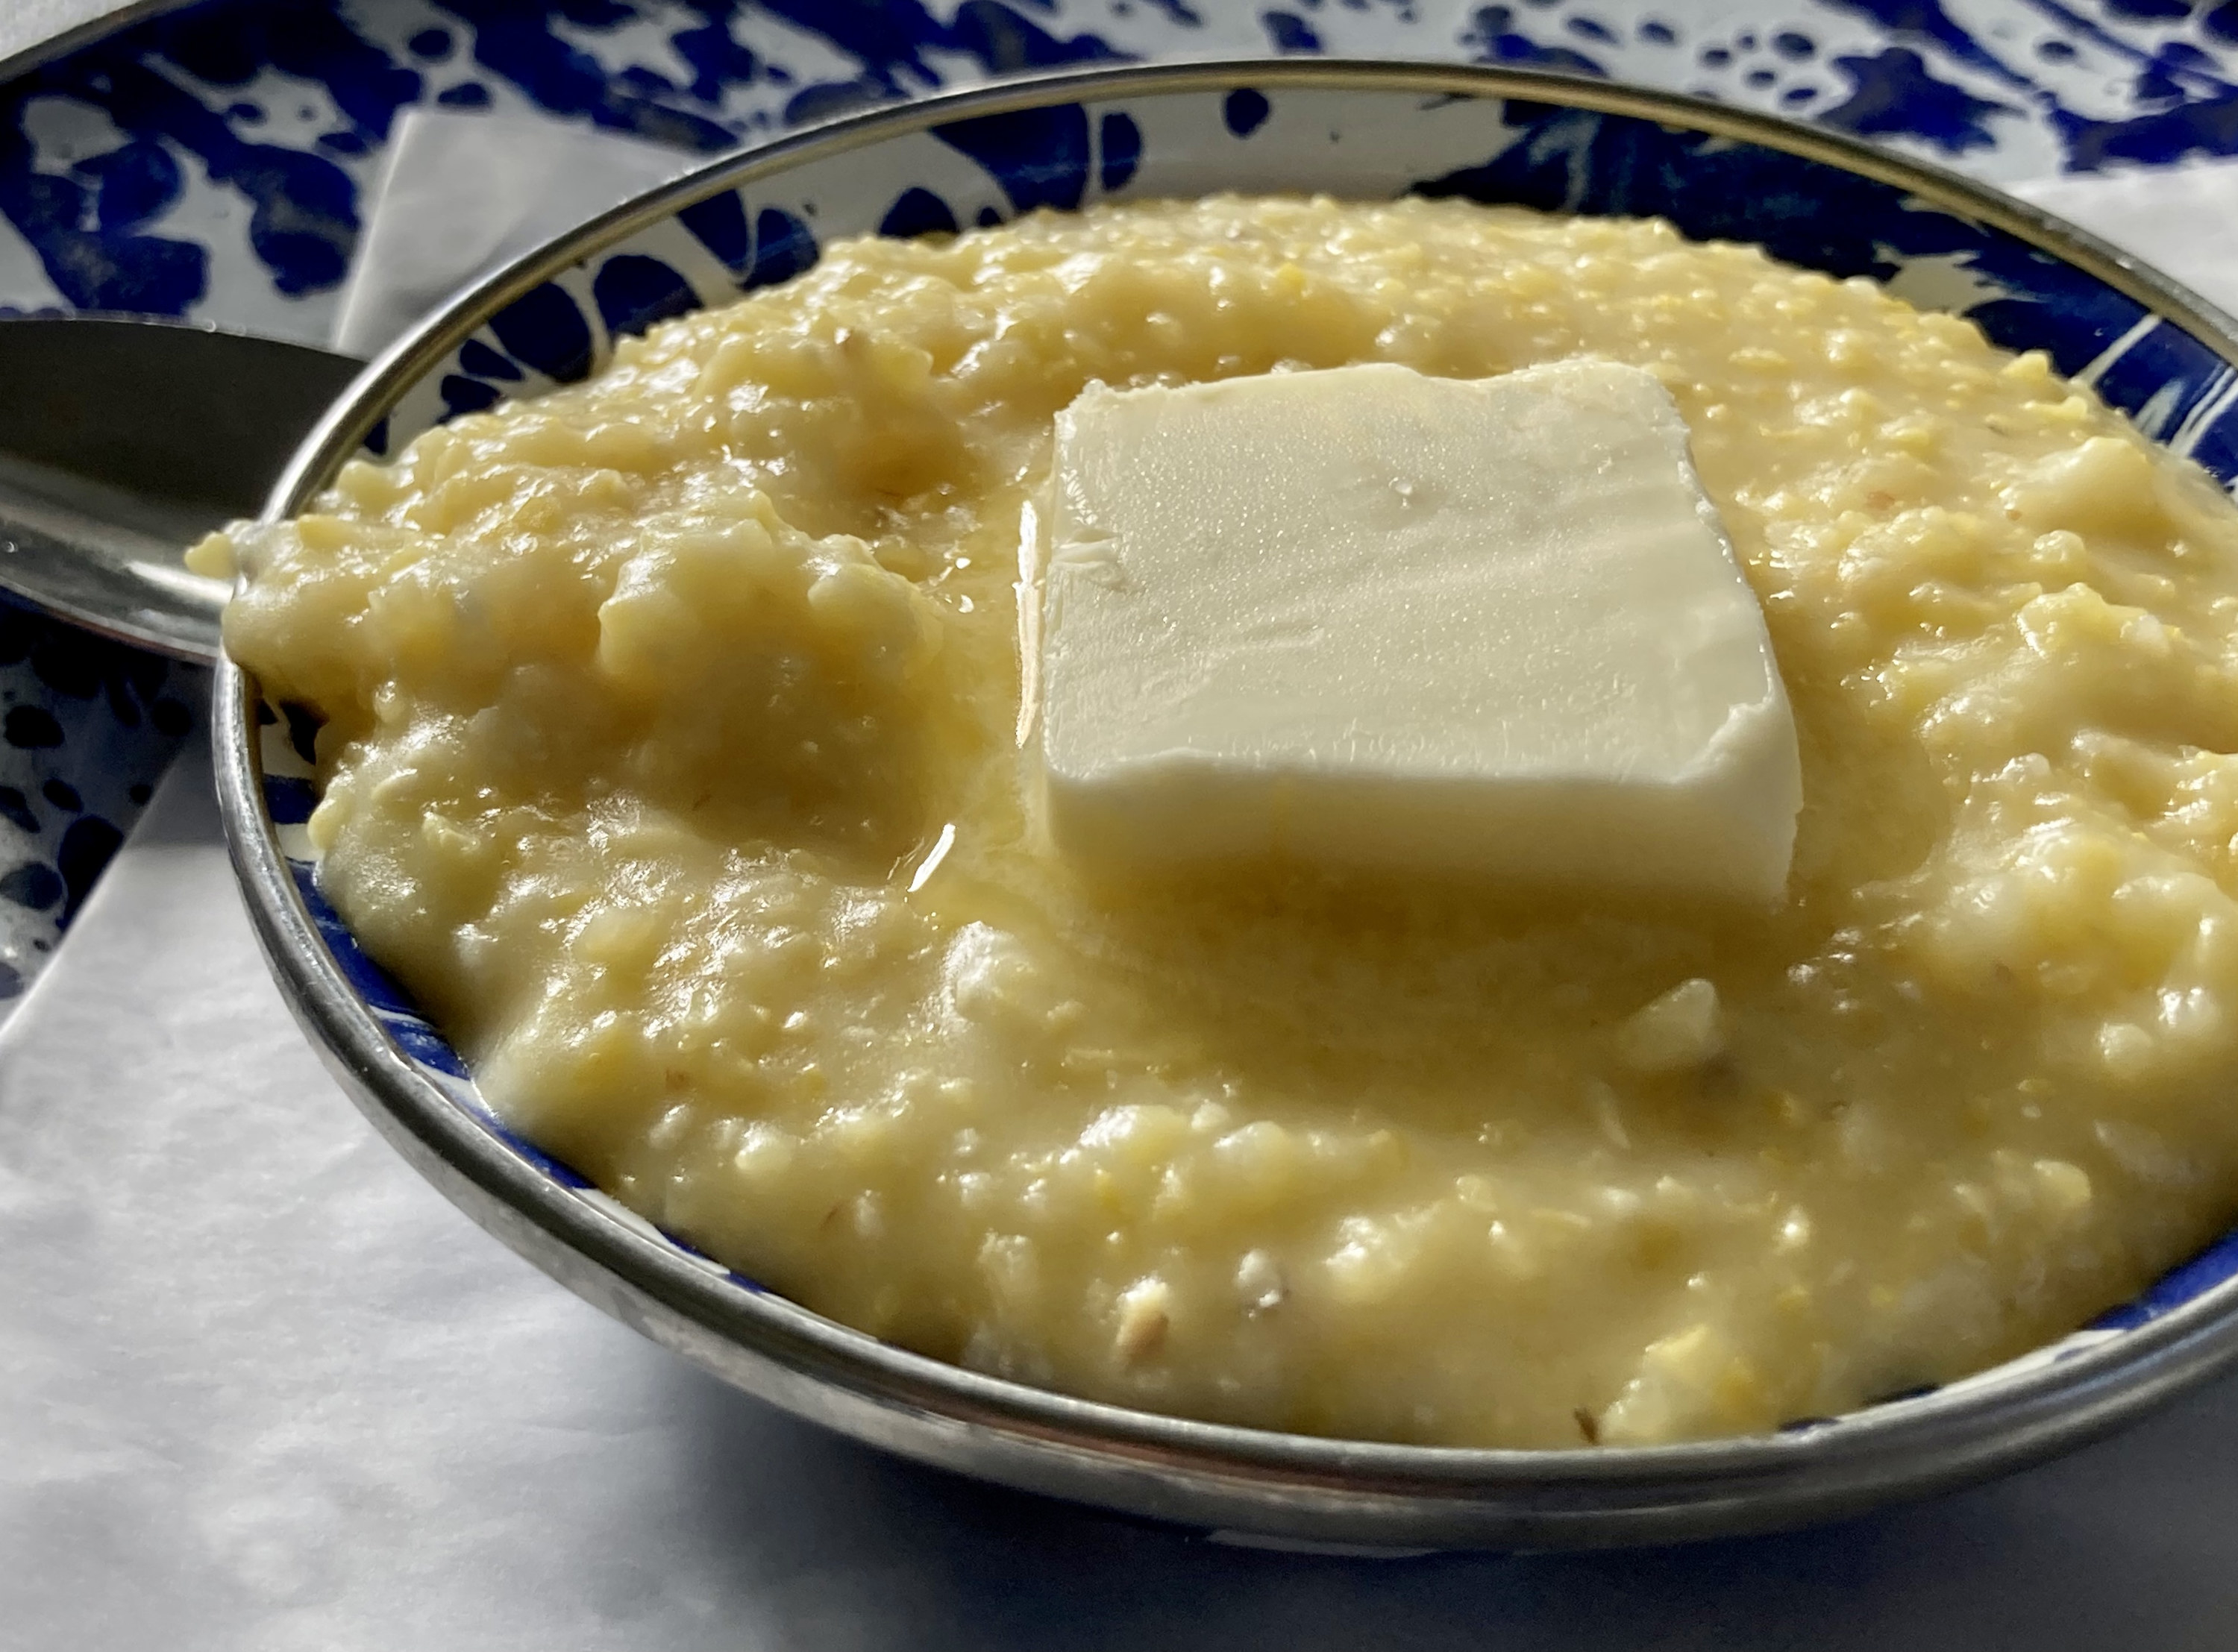 A plate of grits.